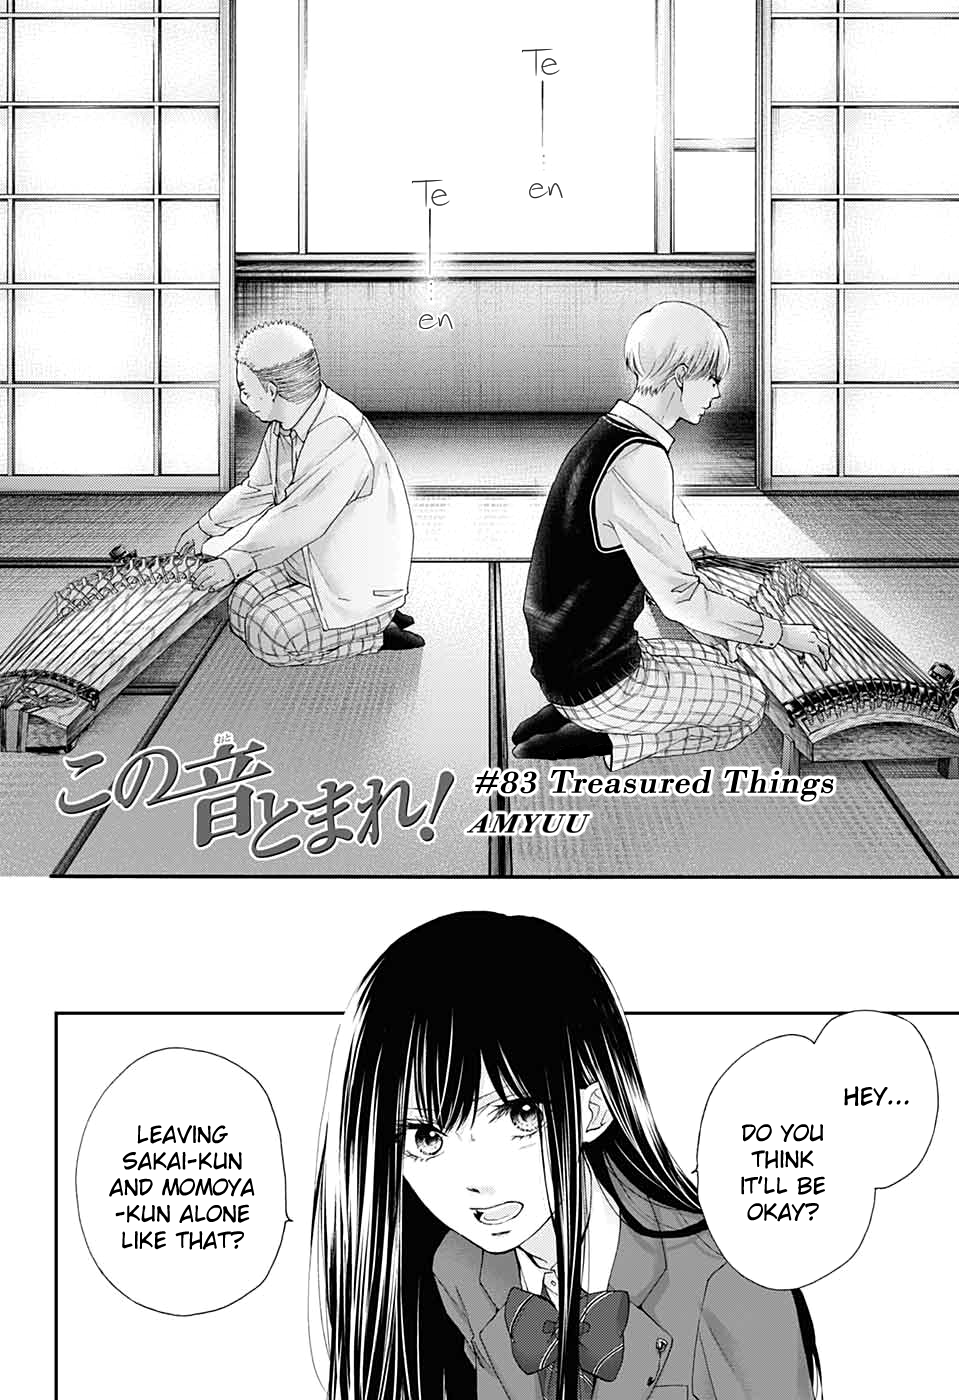 Kono Oto Tomare! Sounds Of Life Vol.21 Chapter 83: Treasured Things (V2) - Picture 2